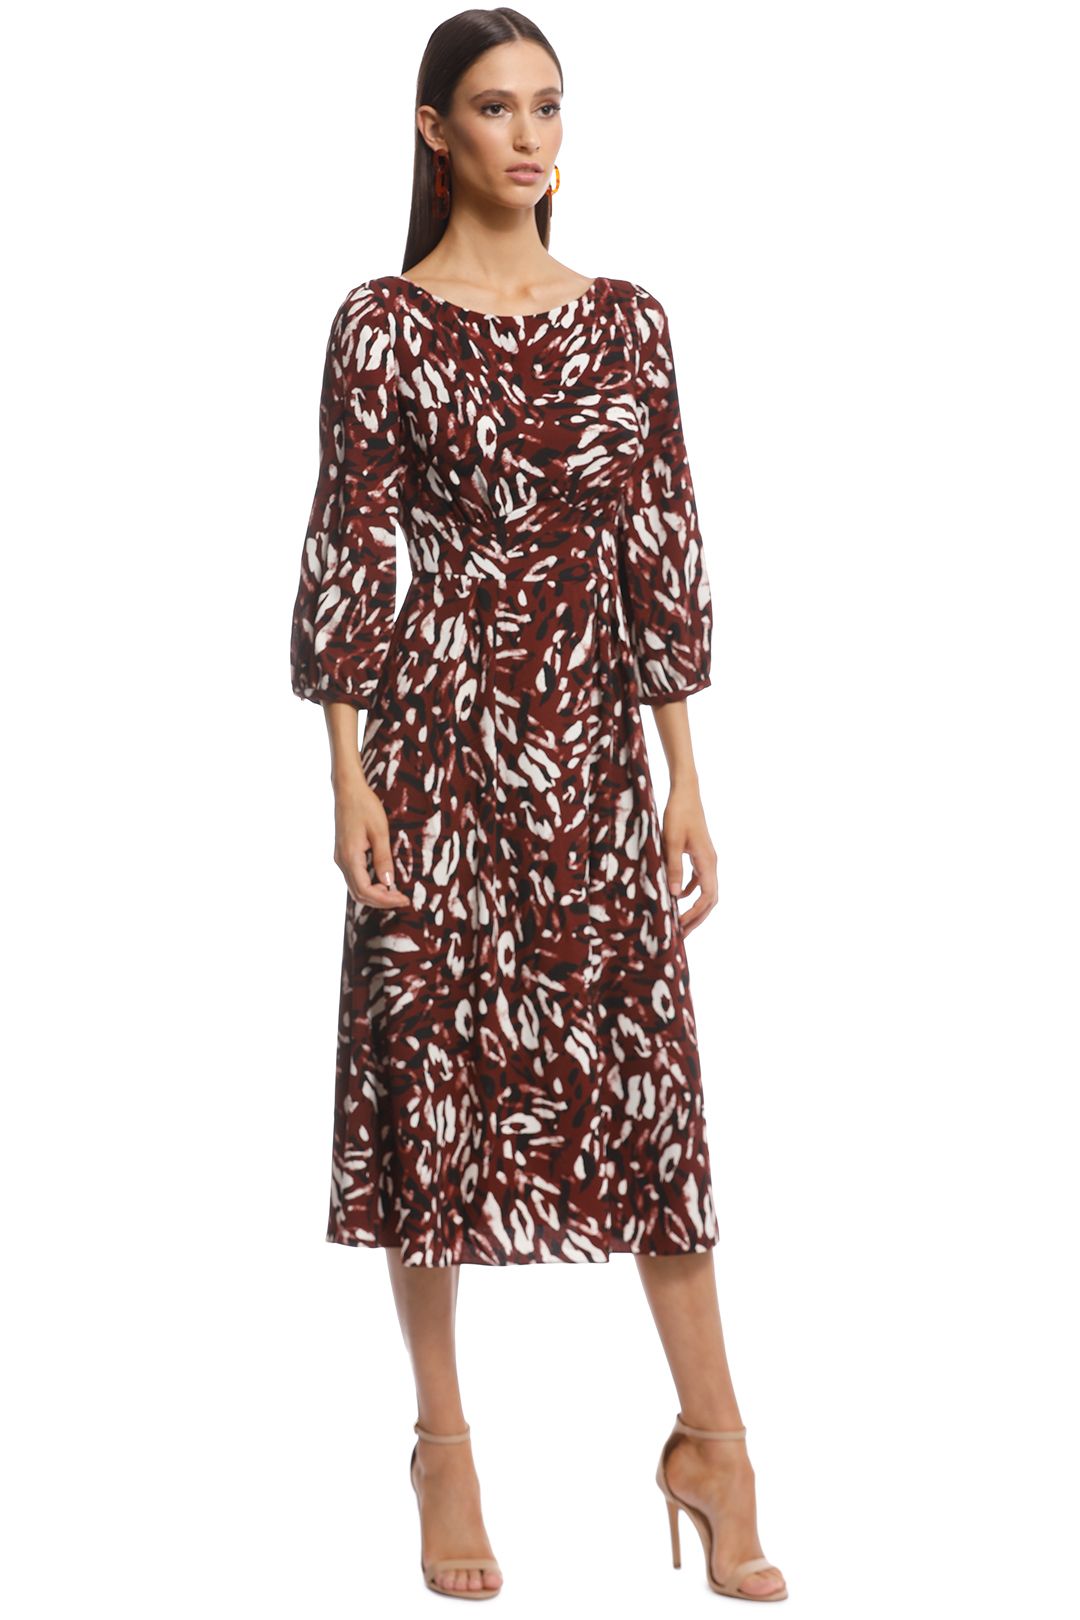 Cue - Abstract Leopard Boat Neck Dress - Burgundy - Side